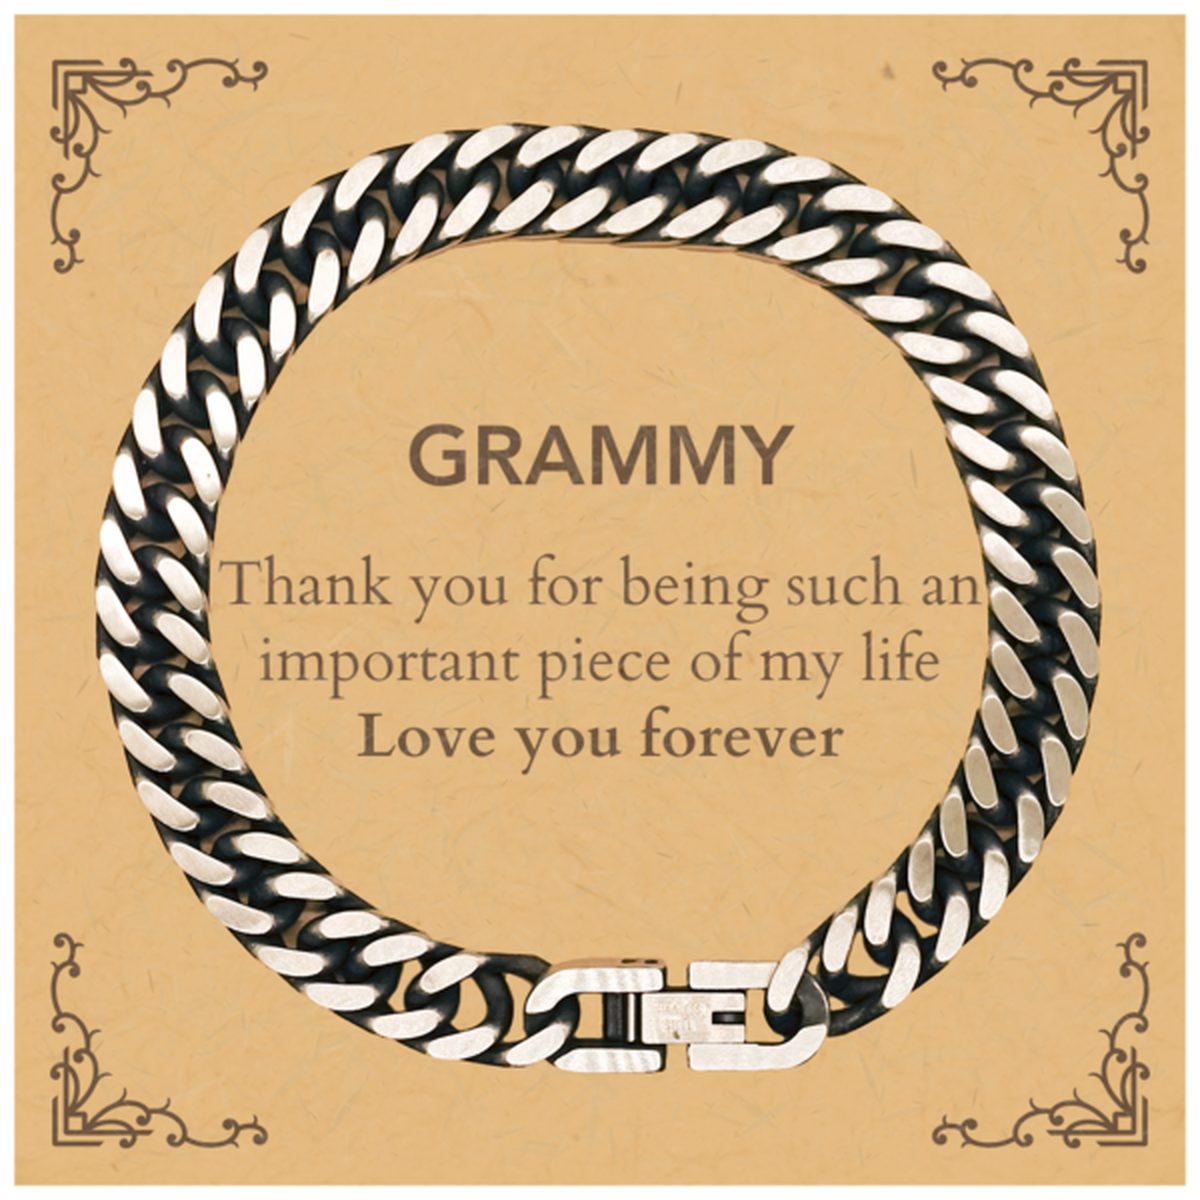 Appropriate Grammy Cuban Link Chain Bracelet Epic Birthday Gifts for Grammy Thank you for being such an important piece of my life Grammy Christmas Mothers Fathers Day